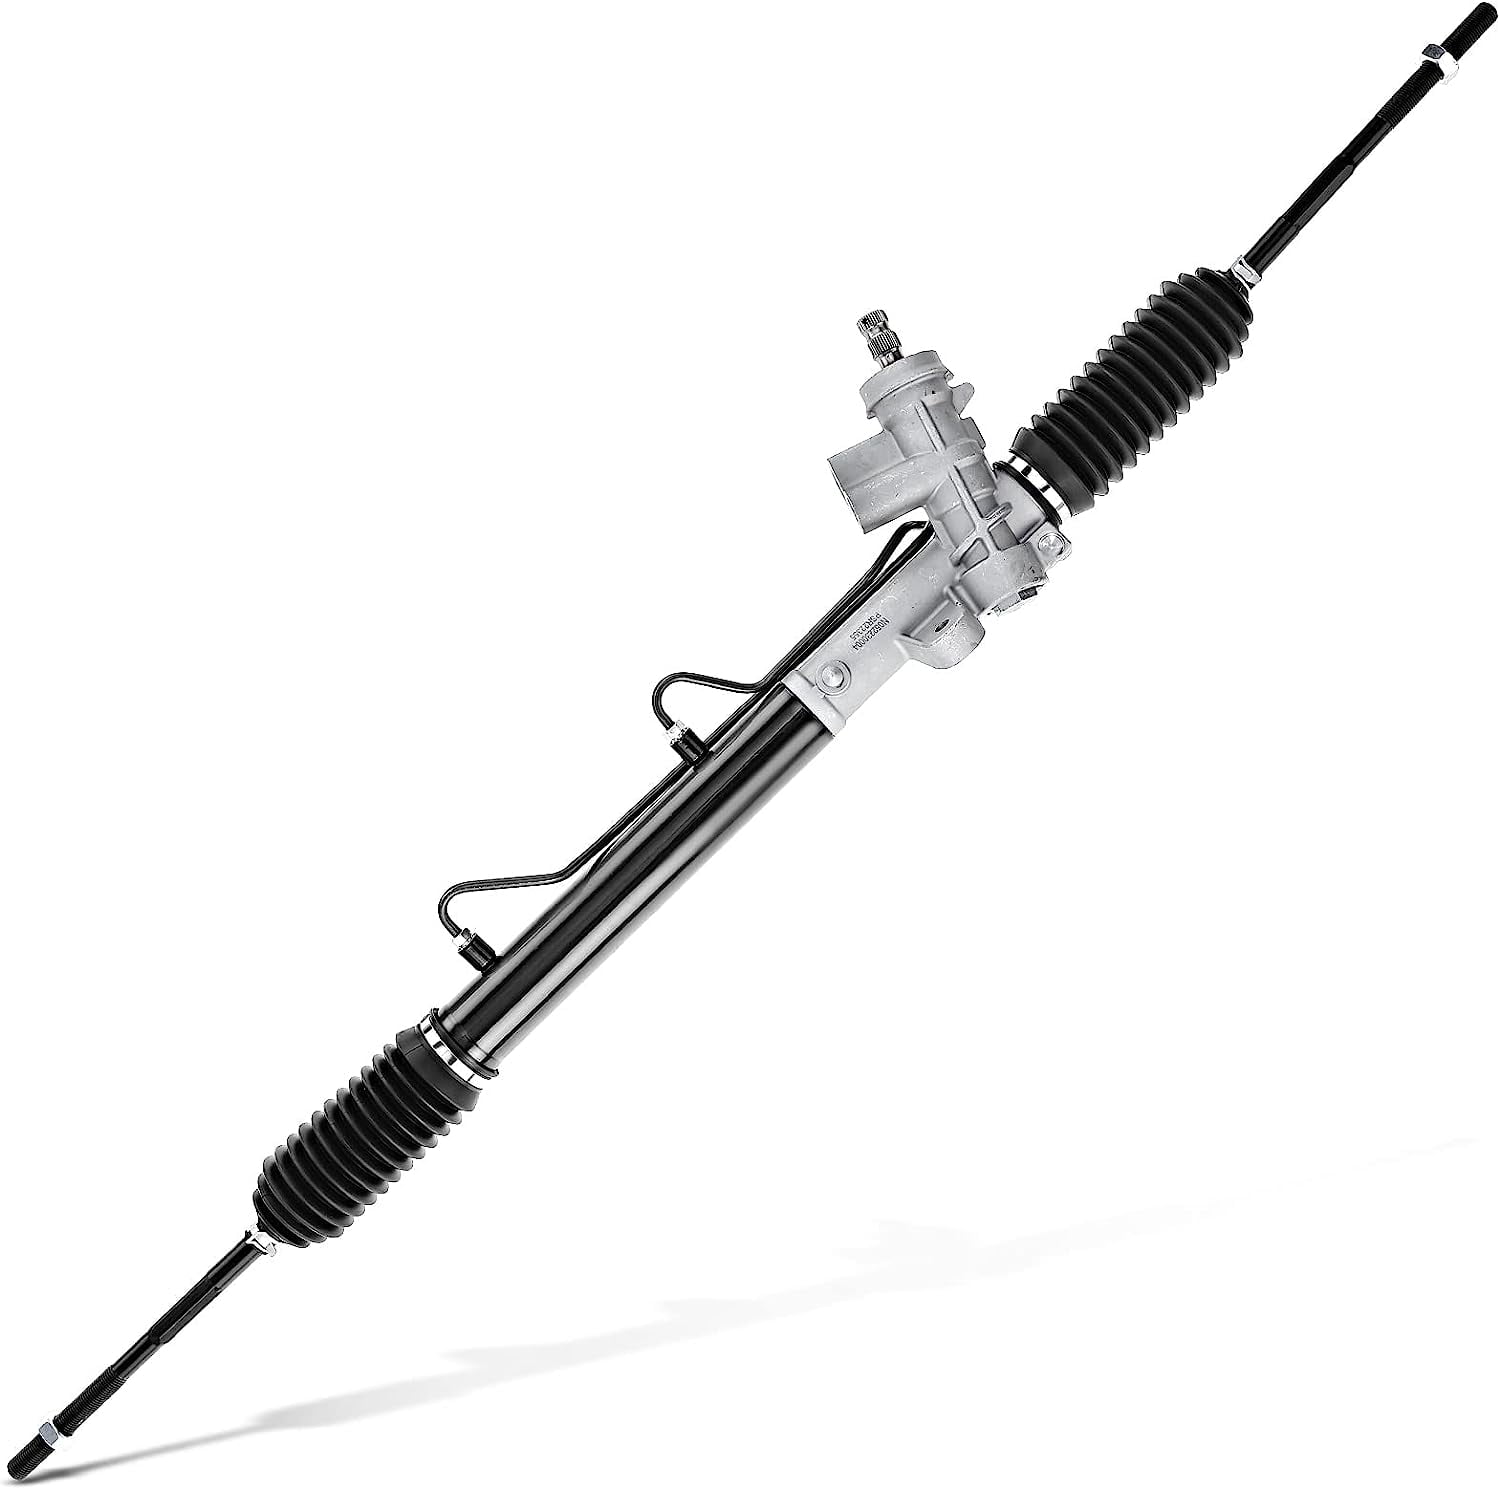 A-Premium Power Steering Rack and Pinion Assembly, with Boots, Compatible  with Chrysler Neon 2001-2002 & Dodge Neon 2001-2005, SX 2.0 2003 & Plymouth 